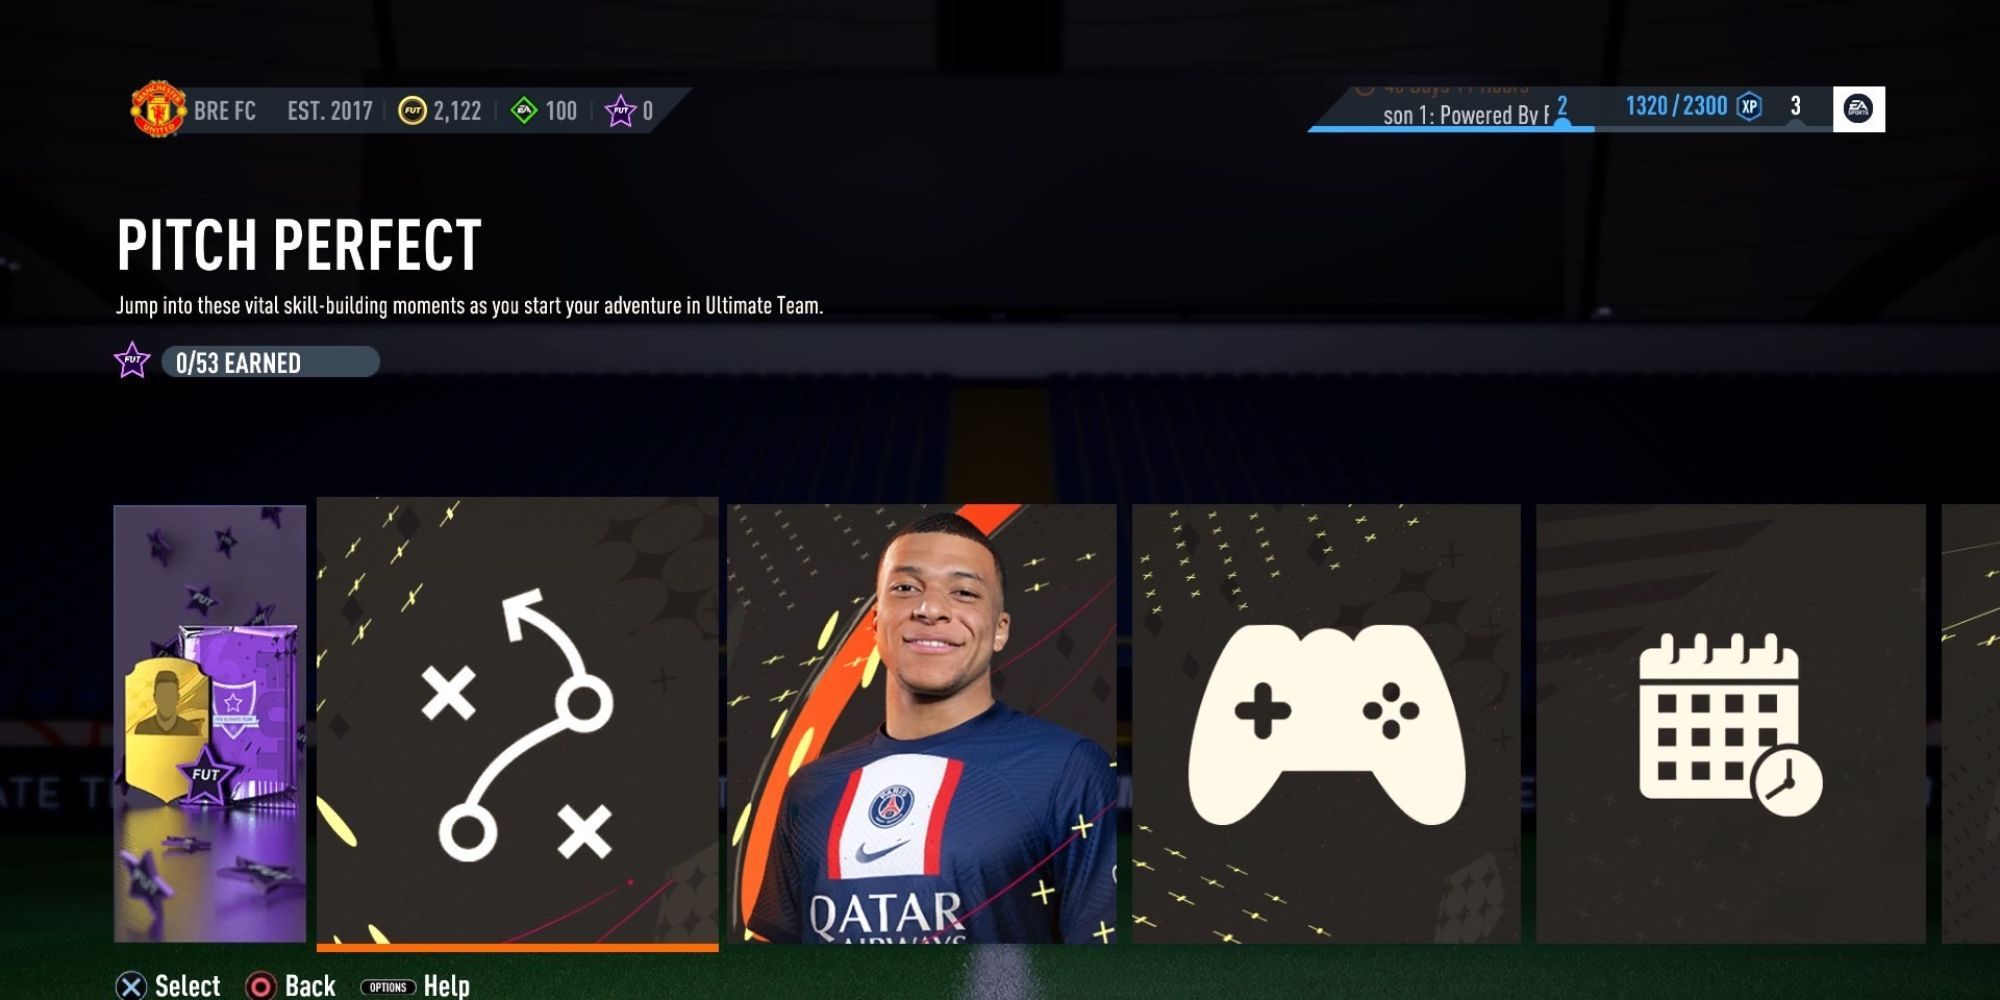 The home page for FUT Moments